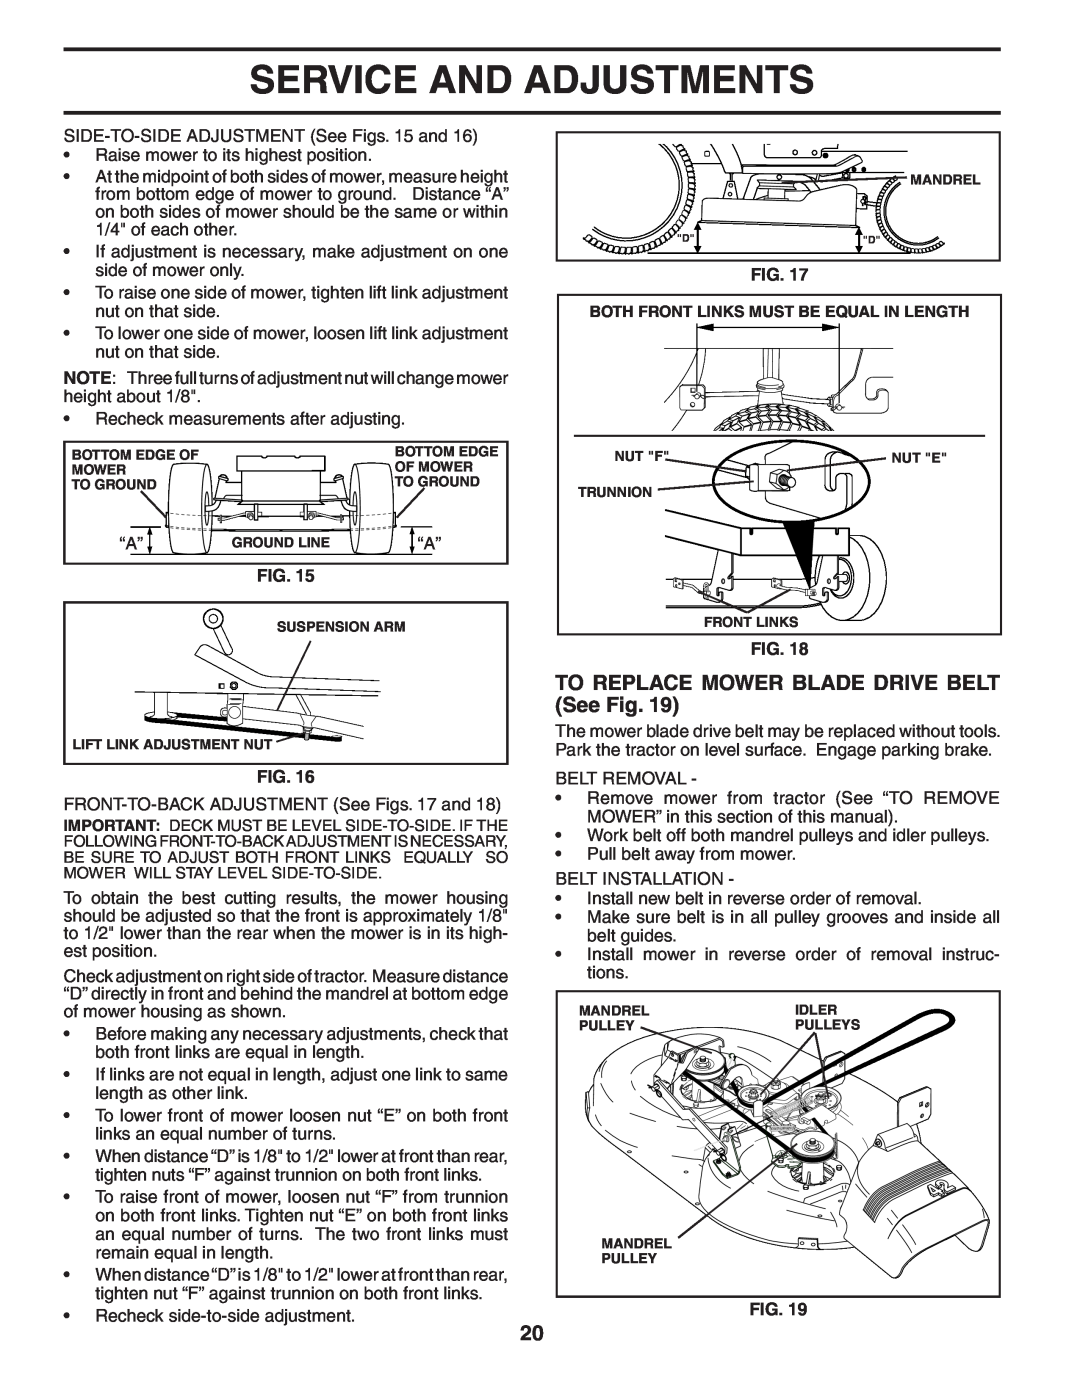 Poulan HD20H42 manual TO REPLACE MOWER BLADE DRIVE BELT See Fig, Service And Adjustments 